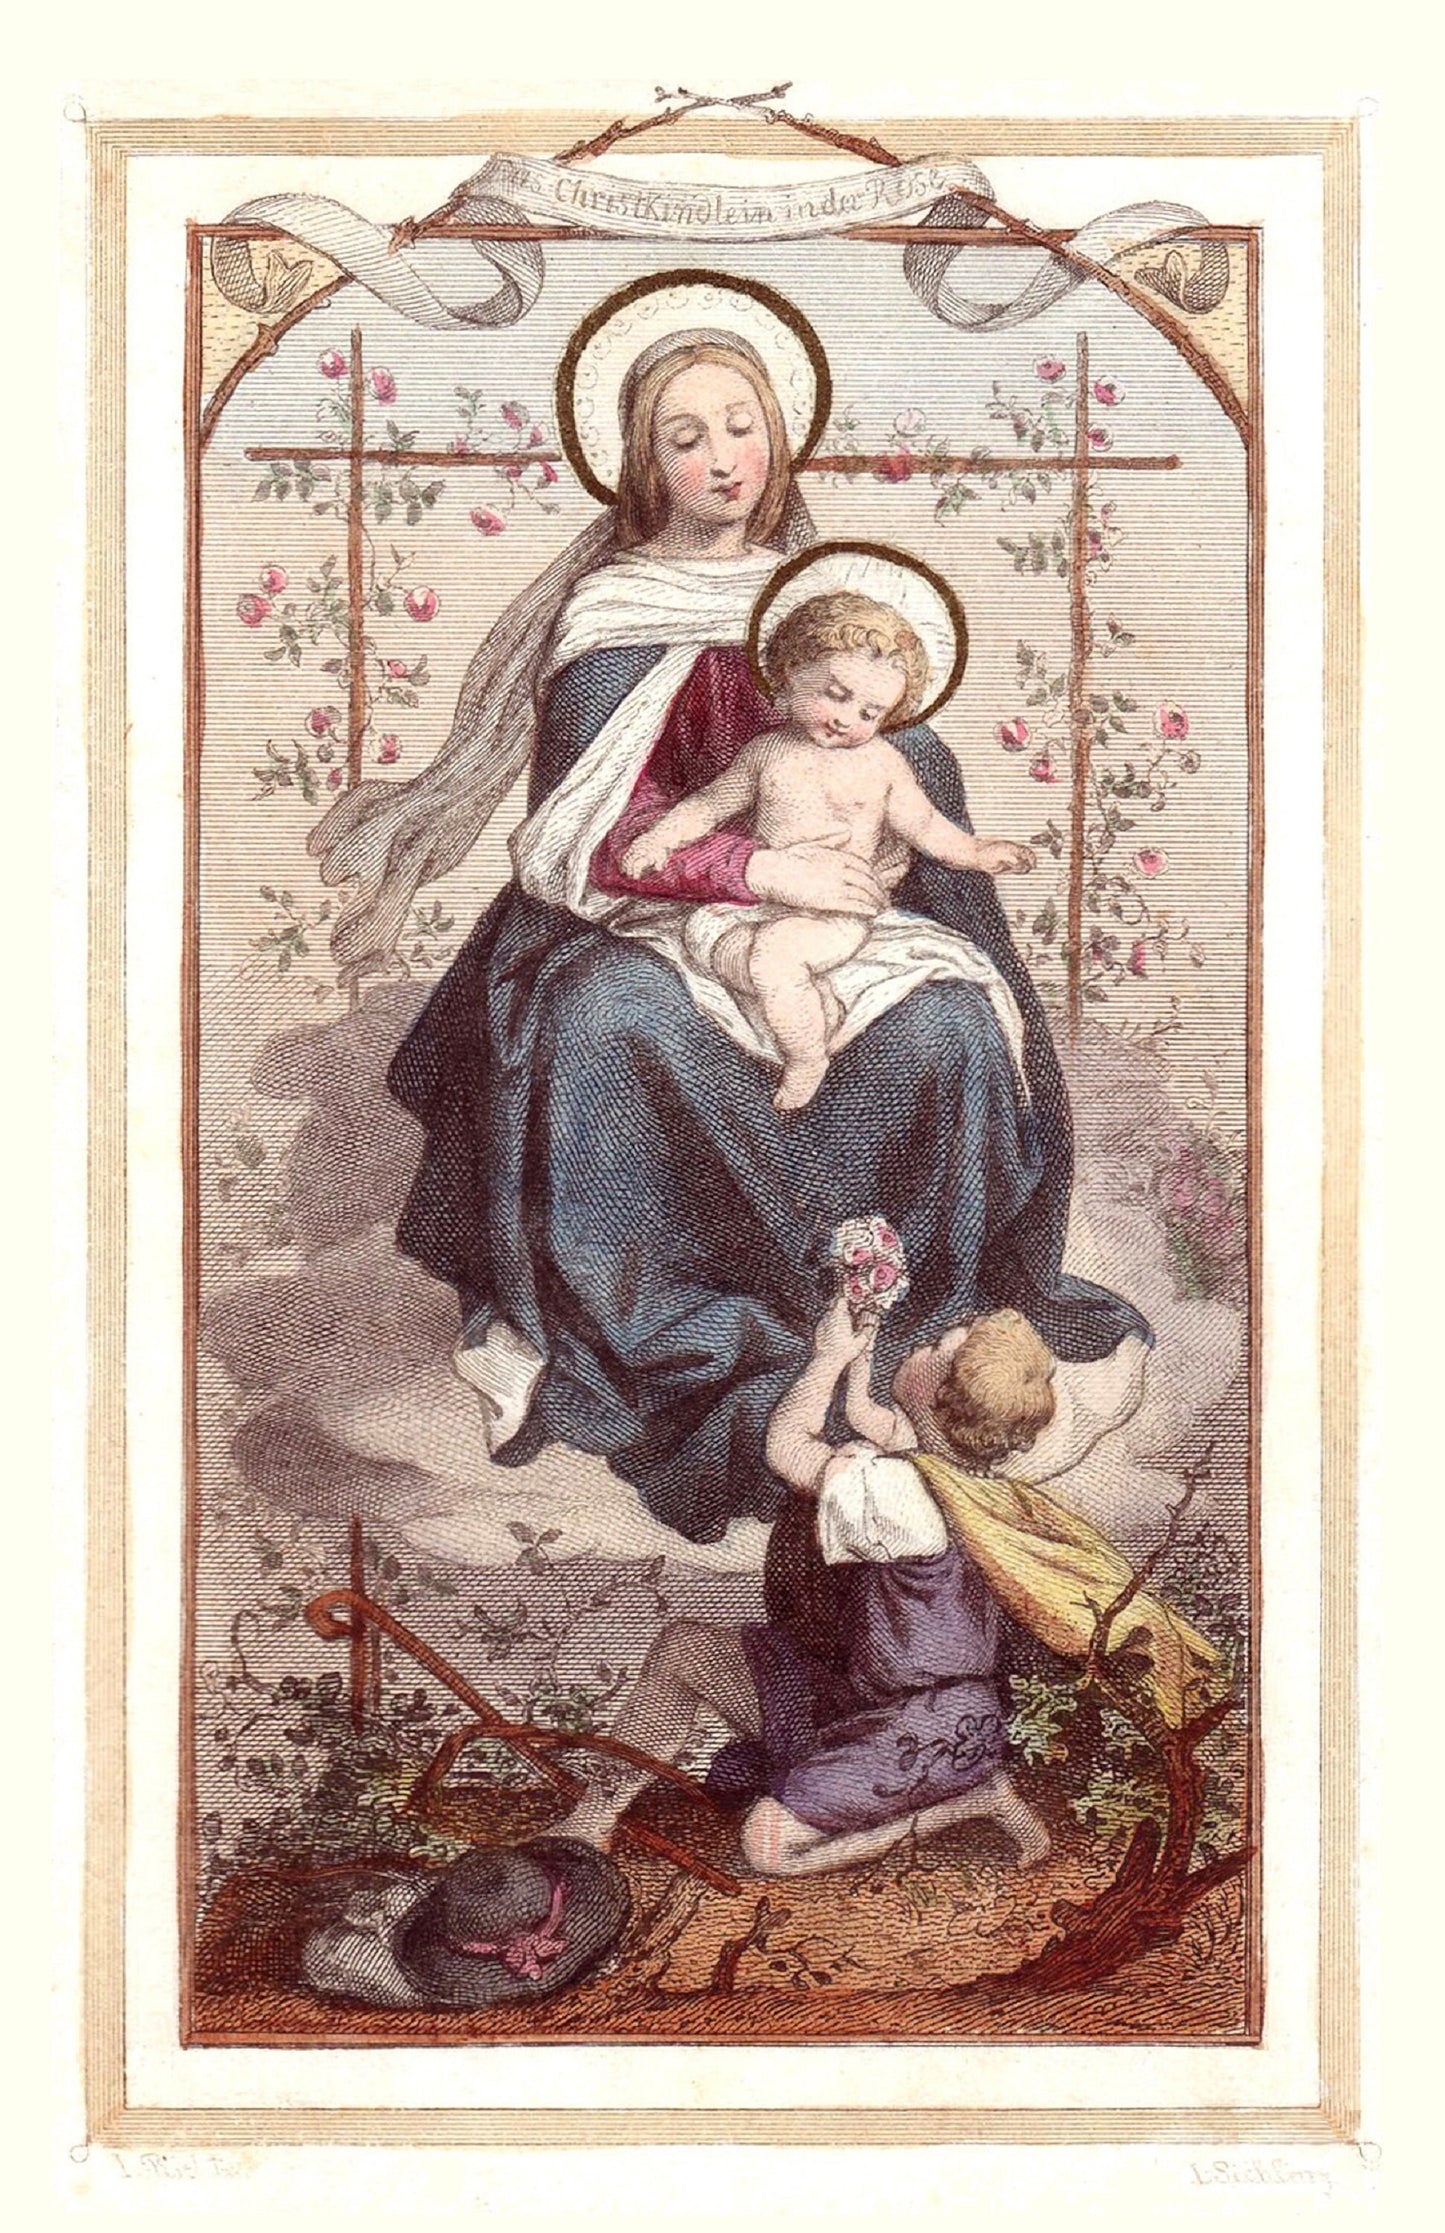 New! 15 Mysteries of the Rosary – pack of 10/100/1000 – Madonna and Child Holy Card